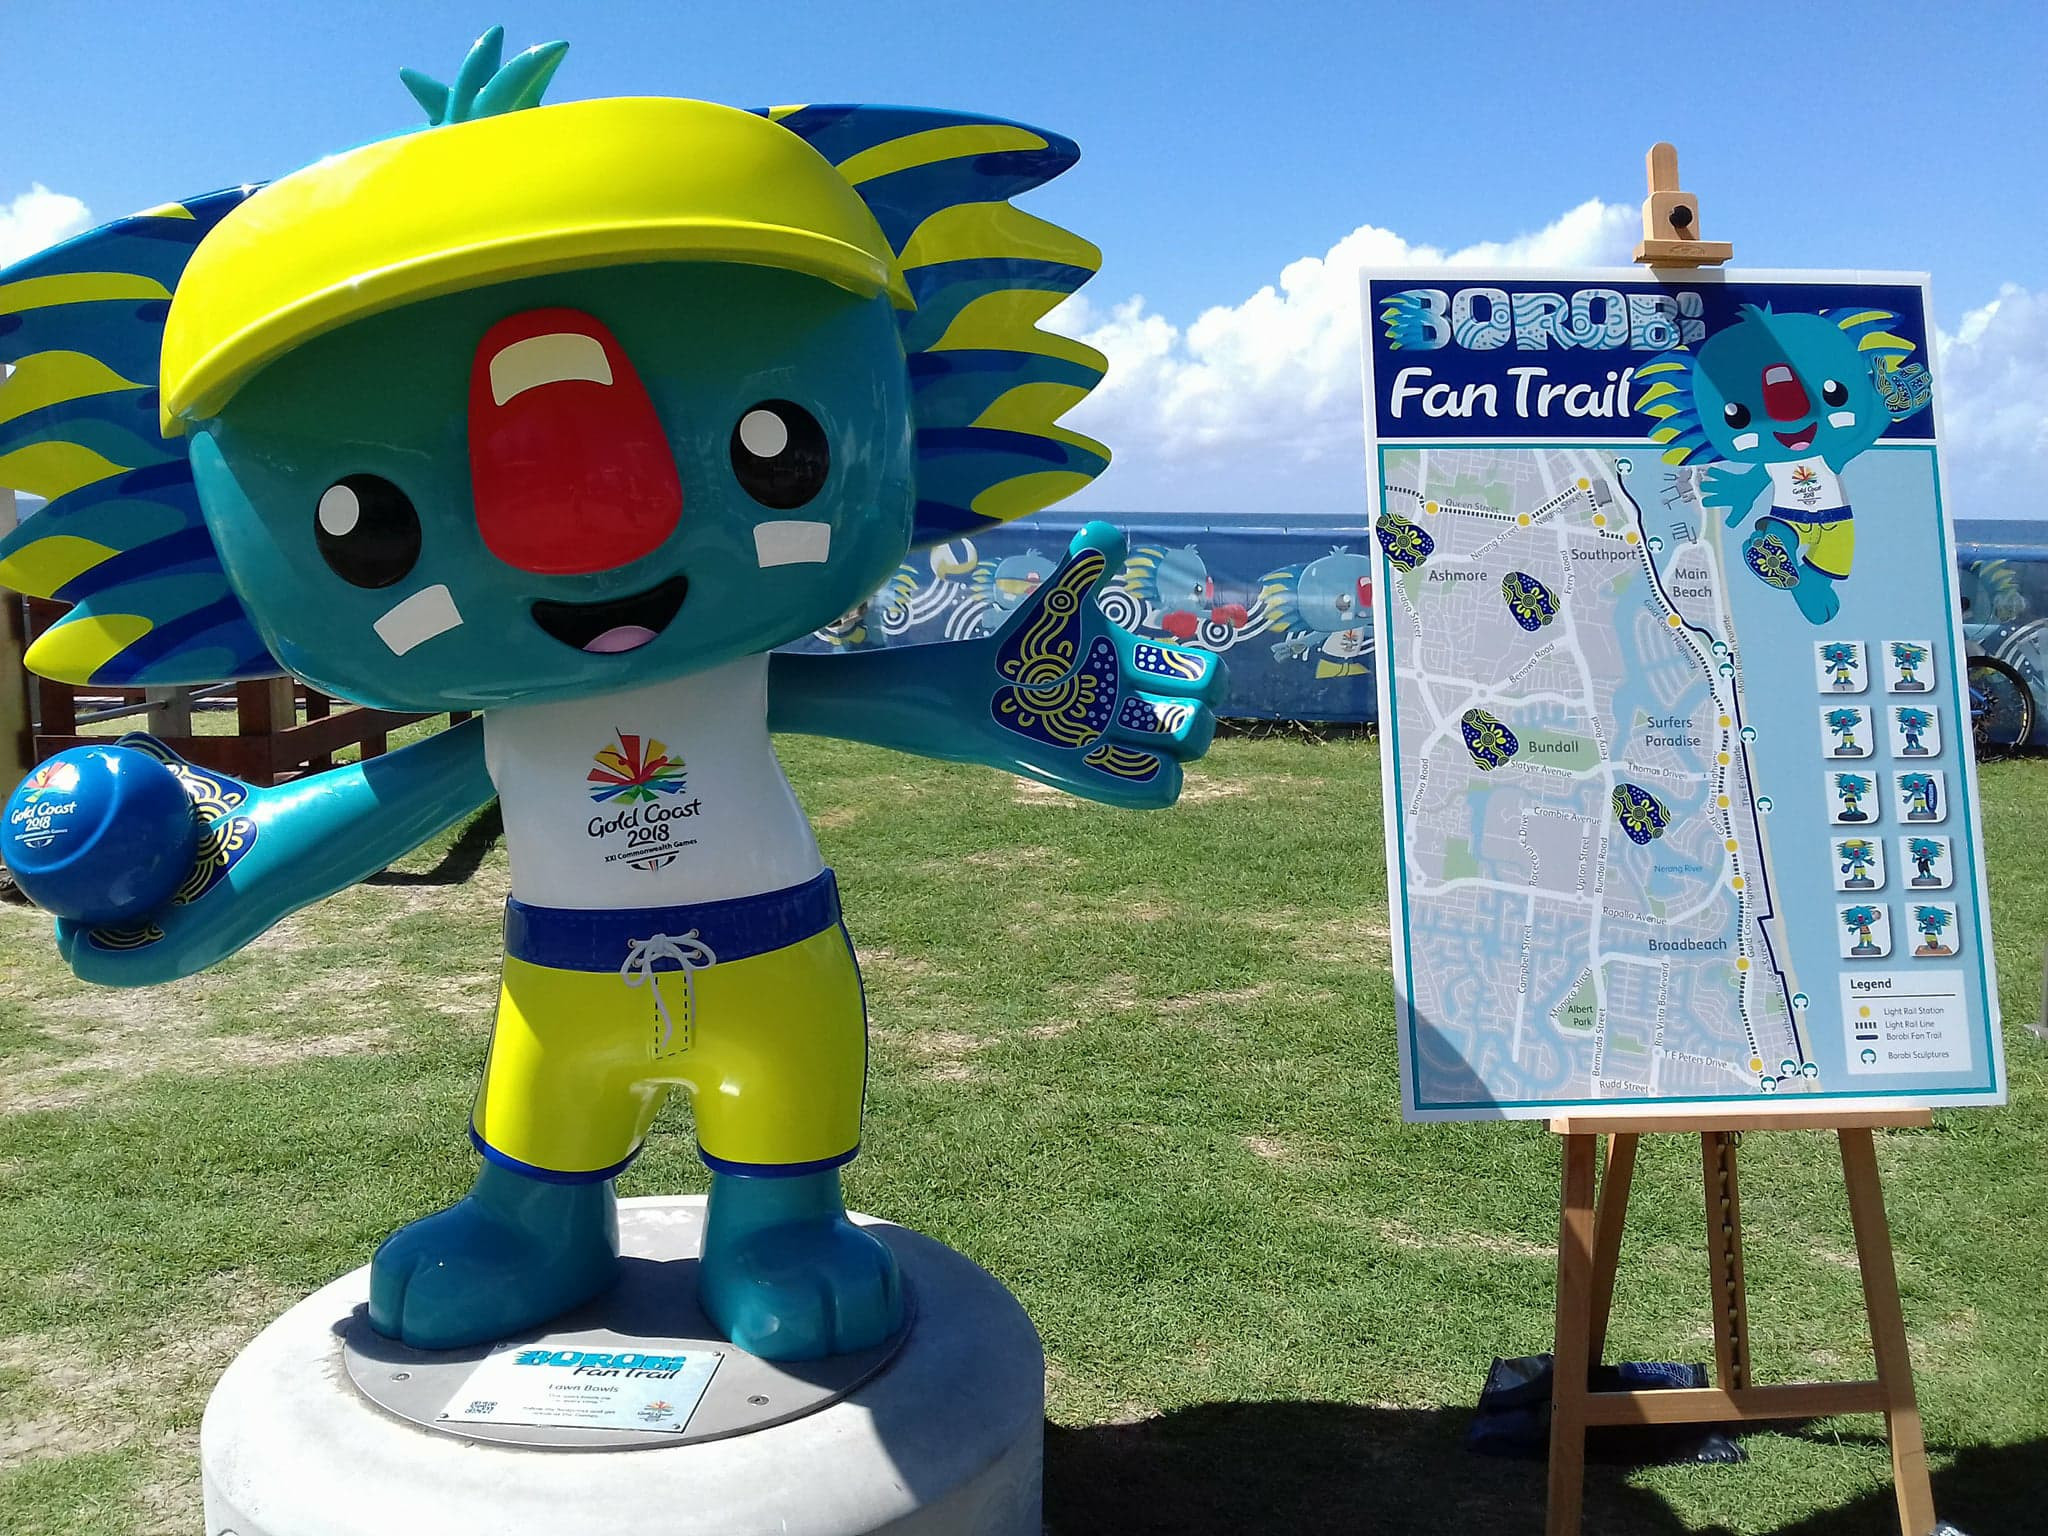 Gold Coast 2018 have started a Borobi fan trial ©ITG